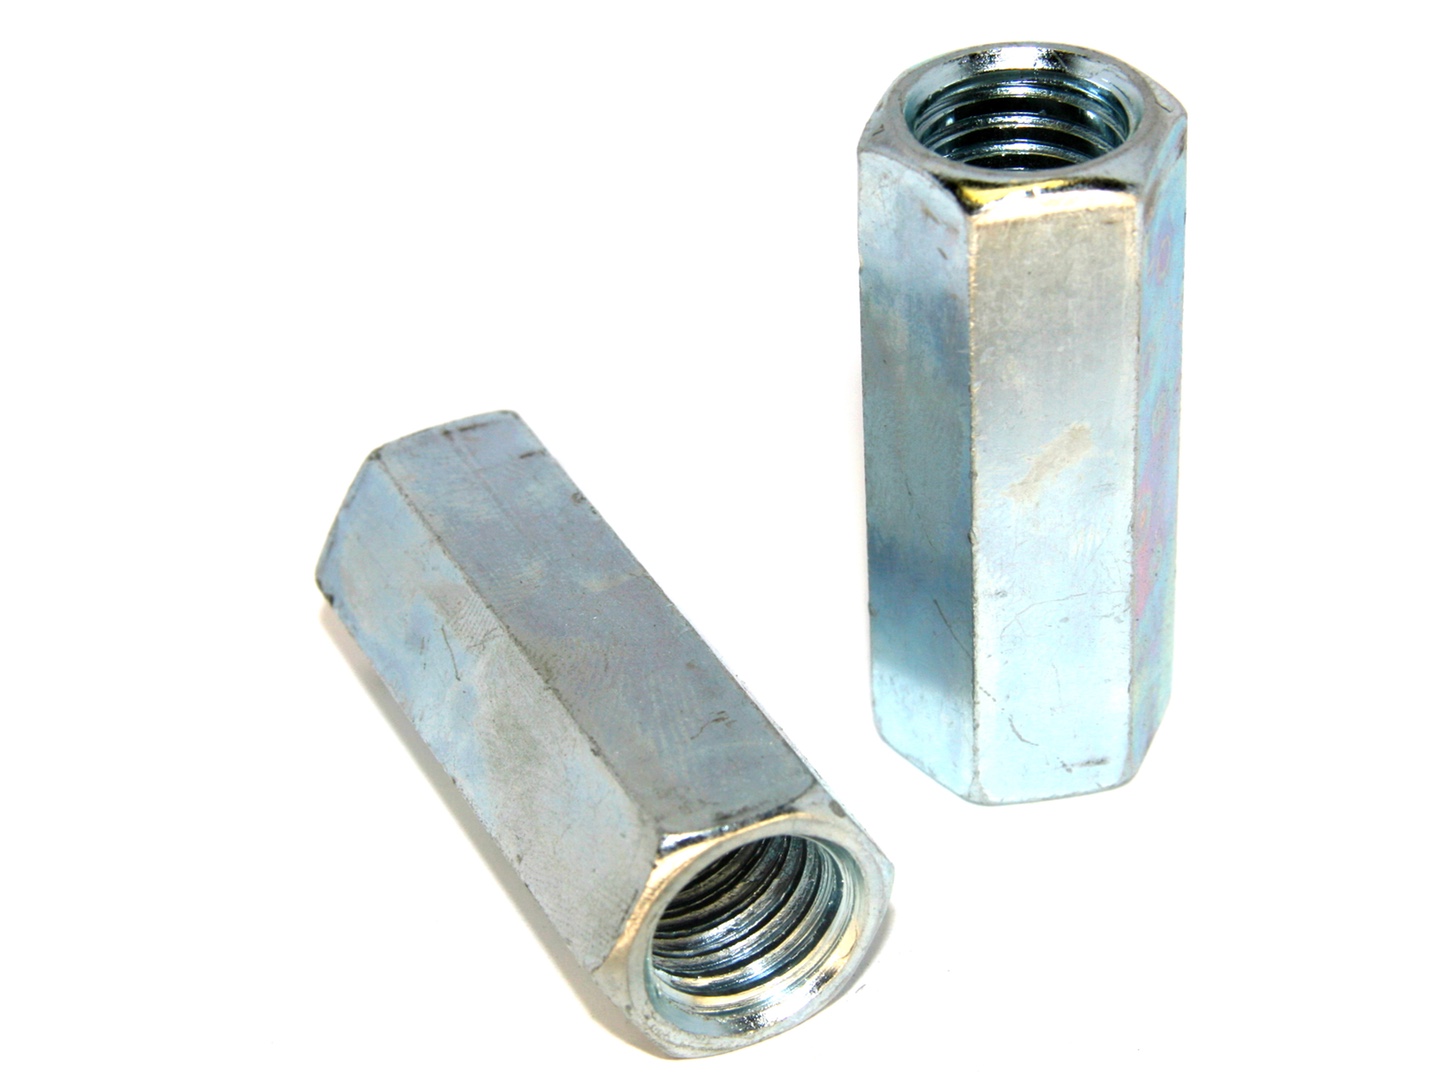 Zinc Plated Fine thread. Hex Coupling Nut 10 1/2" wide 3/8-24 x 1-1/8"